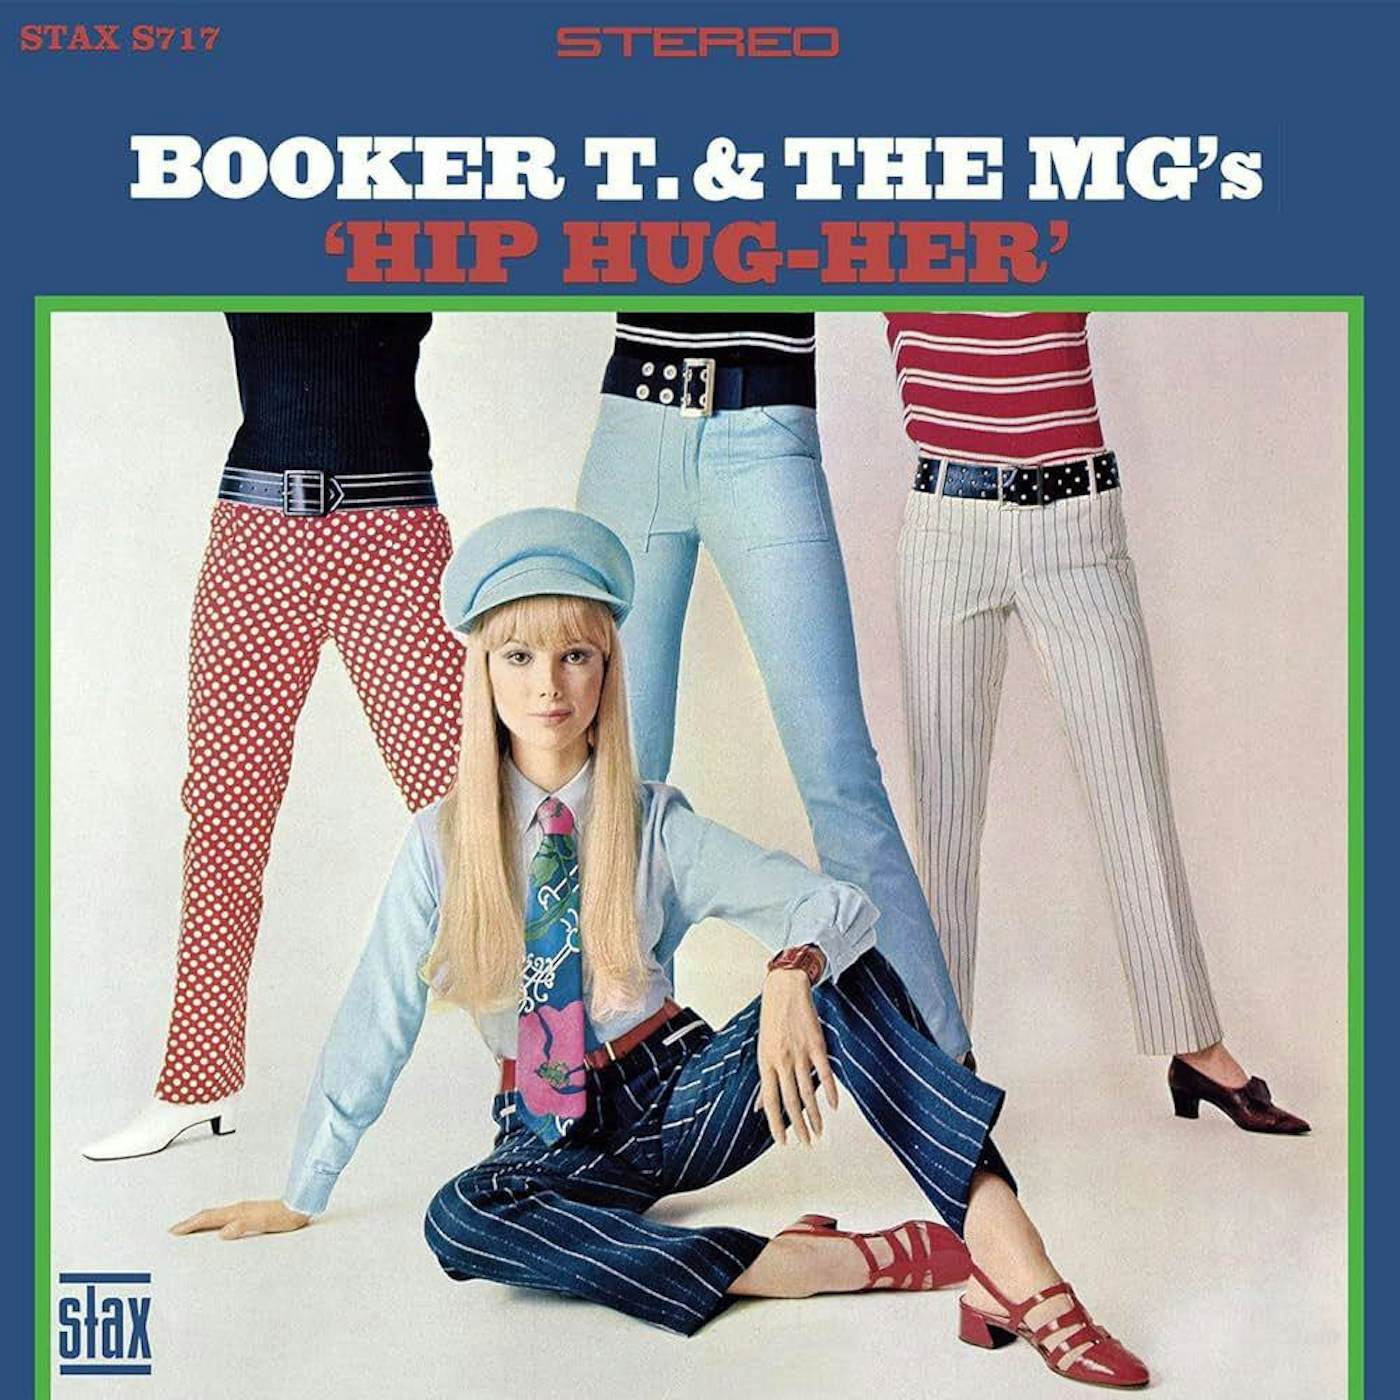 Booker T. & the M.G.'s Hip Hug-her (Apple Red) (AMS Exclusive) Vinyl Record